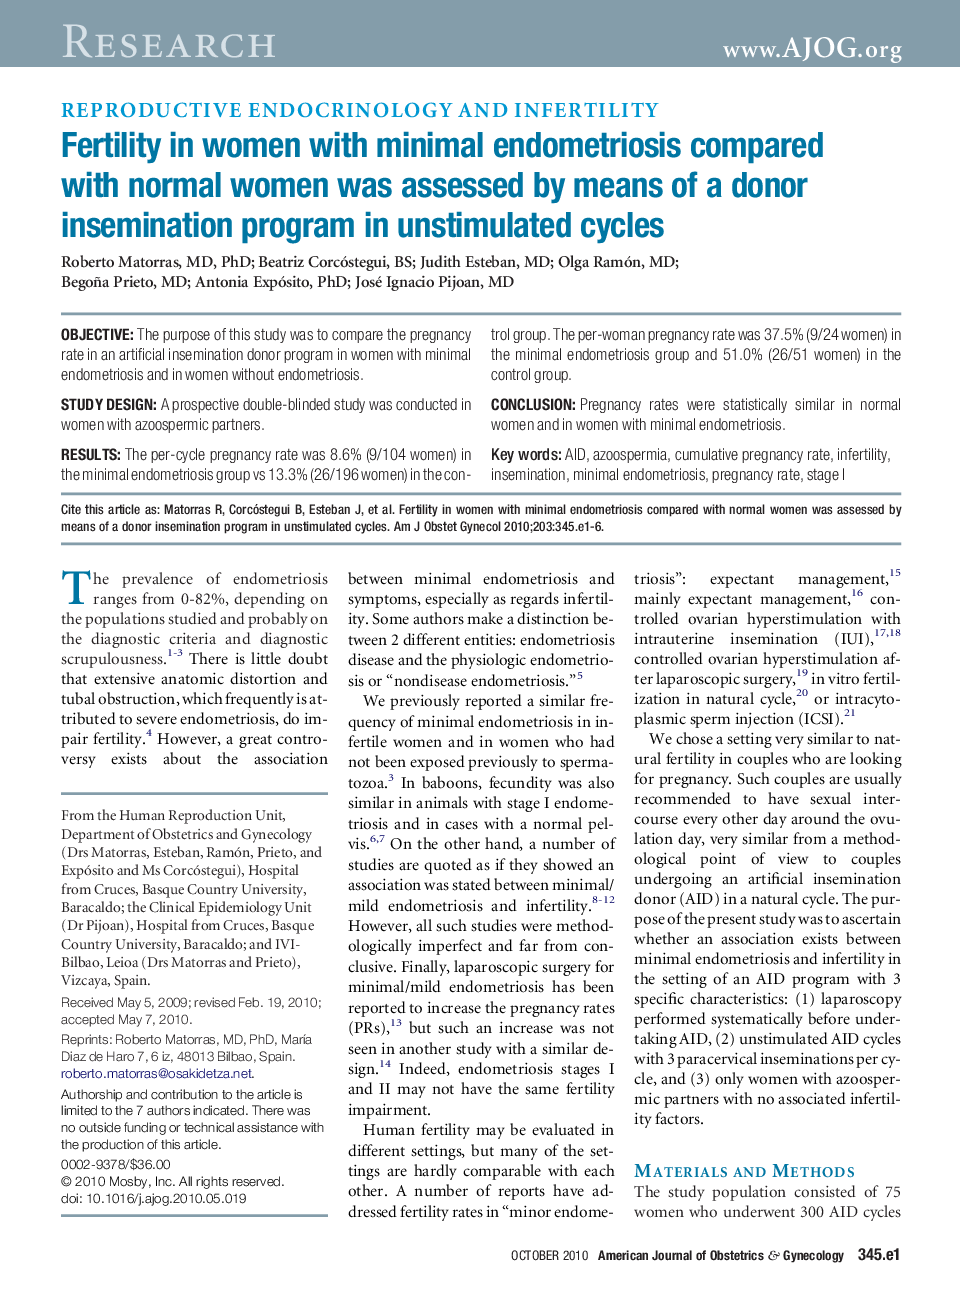 Fertility in women with minimal endometriosis compared with normal women was assessed by means of a donor insemination program in unstimulated cycles